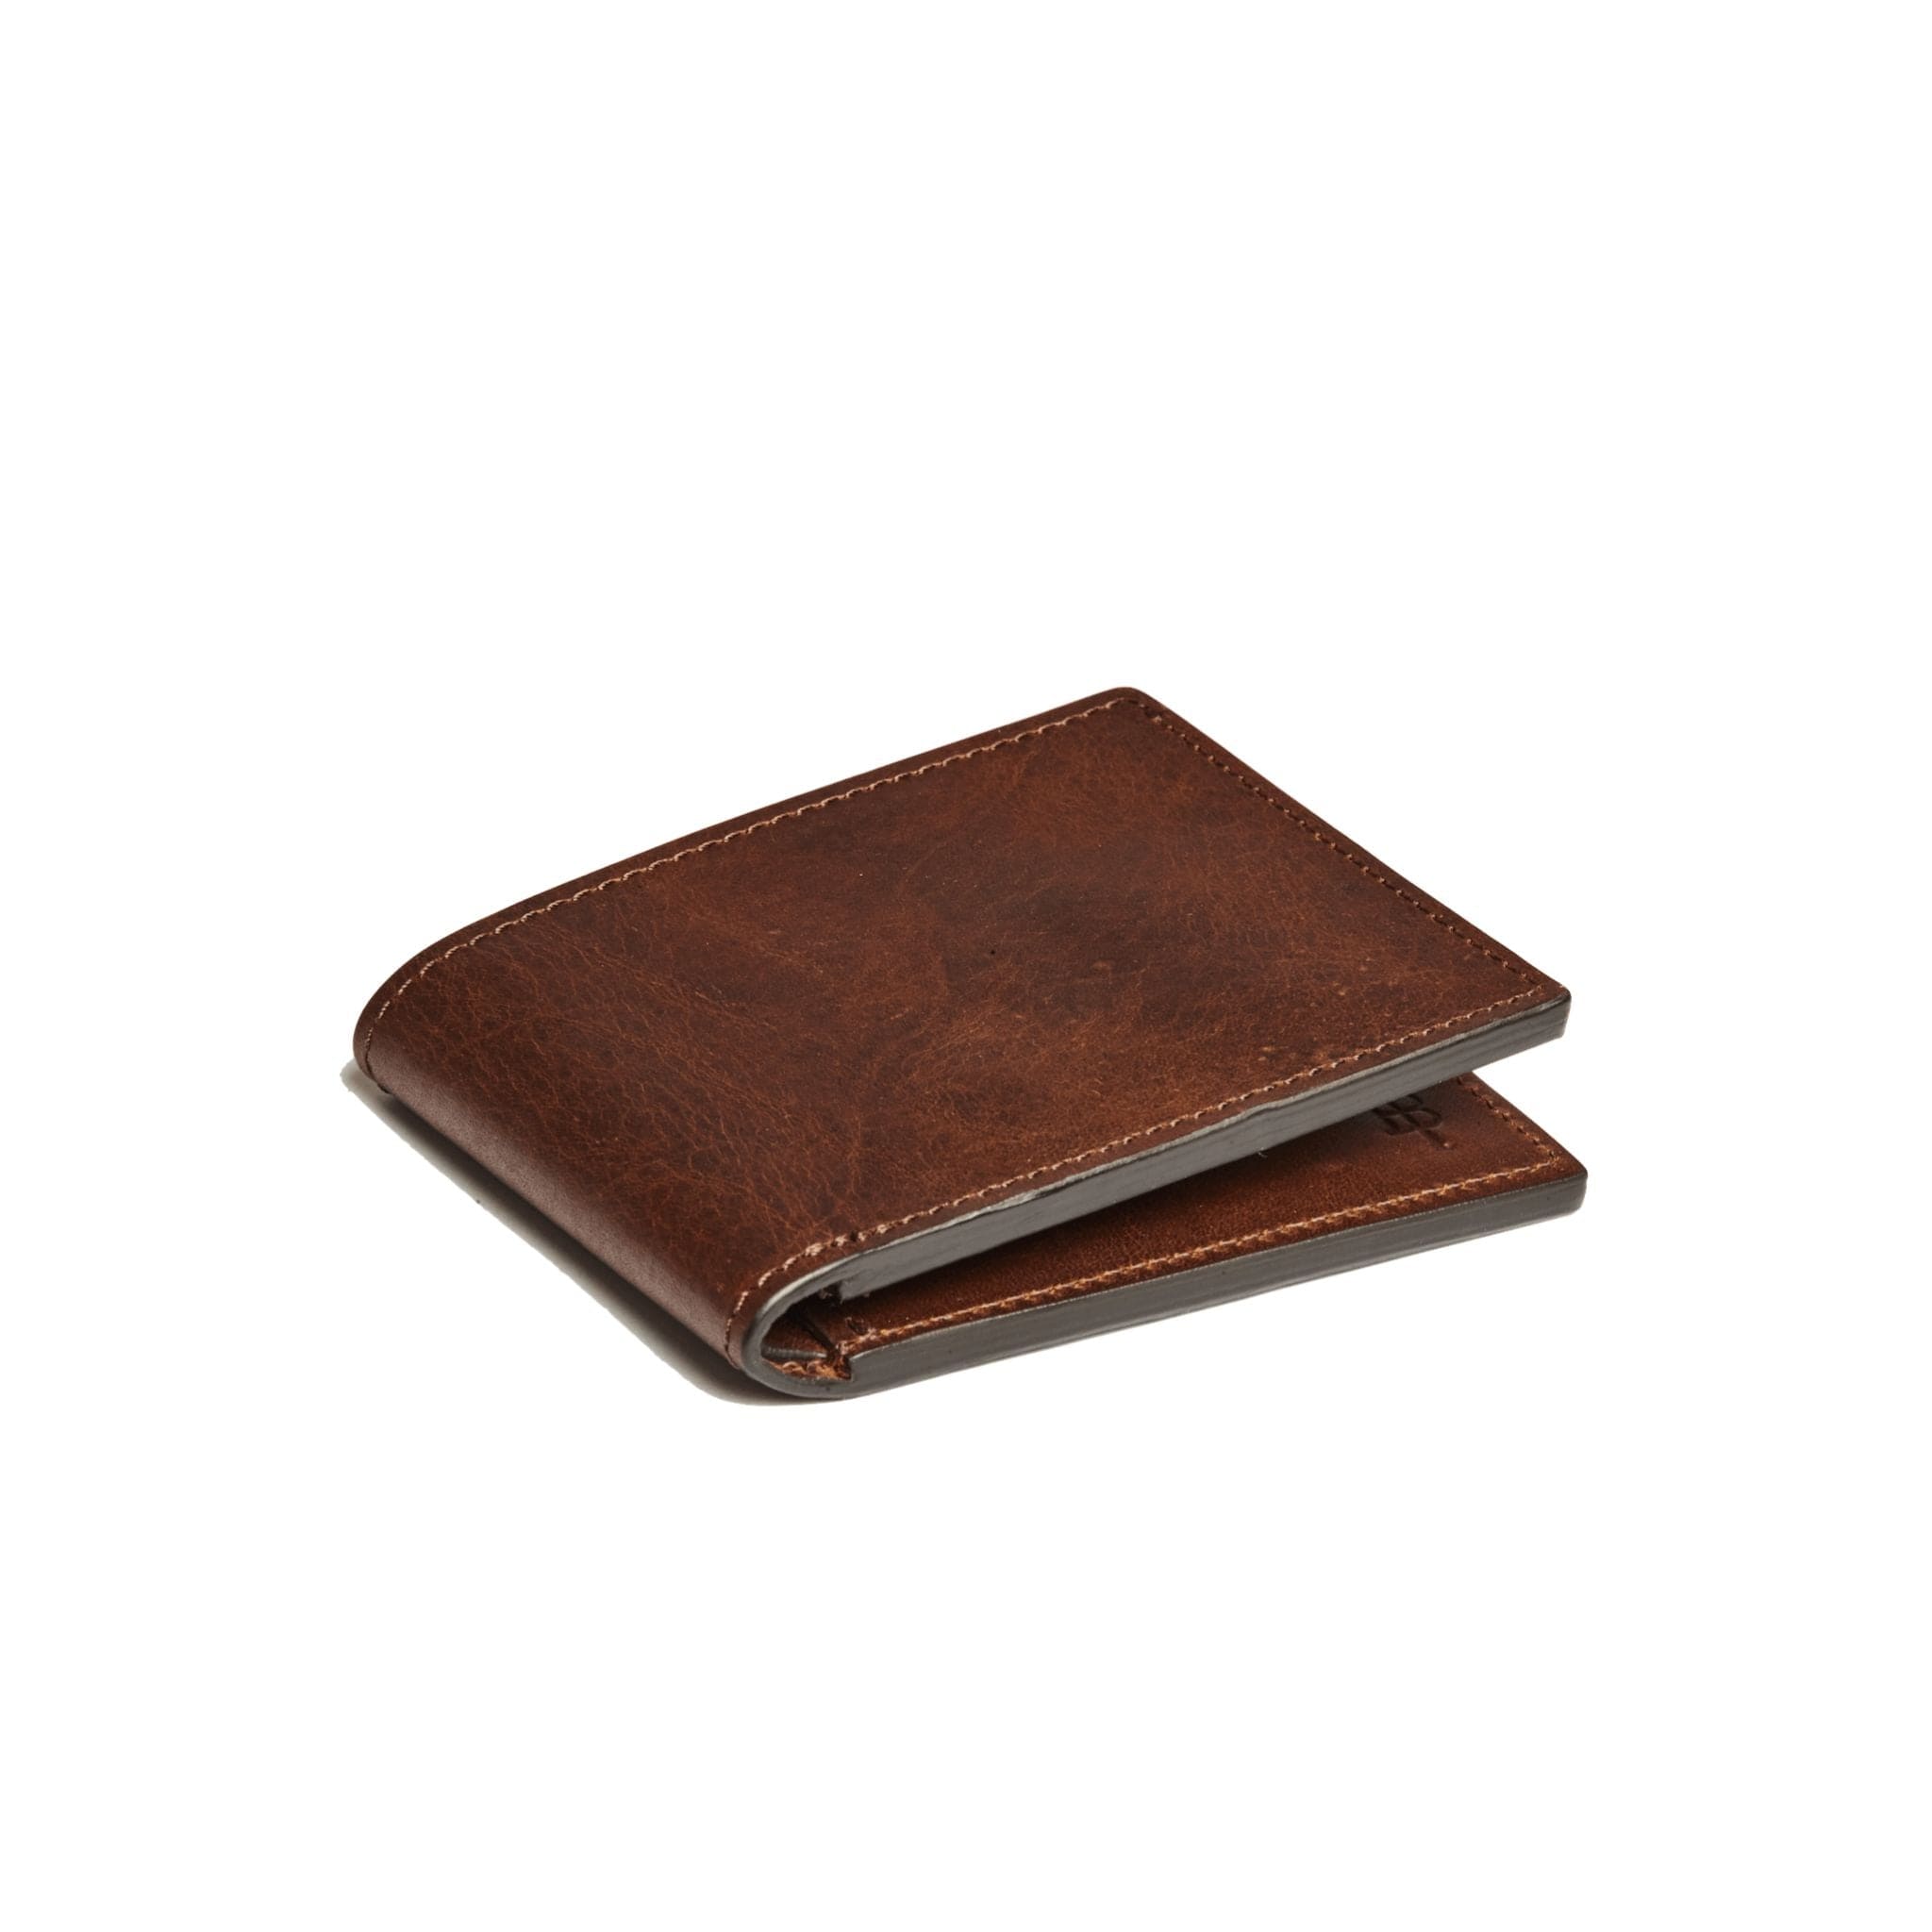 Bi-Fold Bison Leather Wallet With Coin Pocket by The Leather Store (4